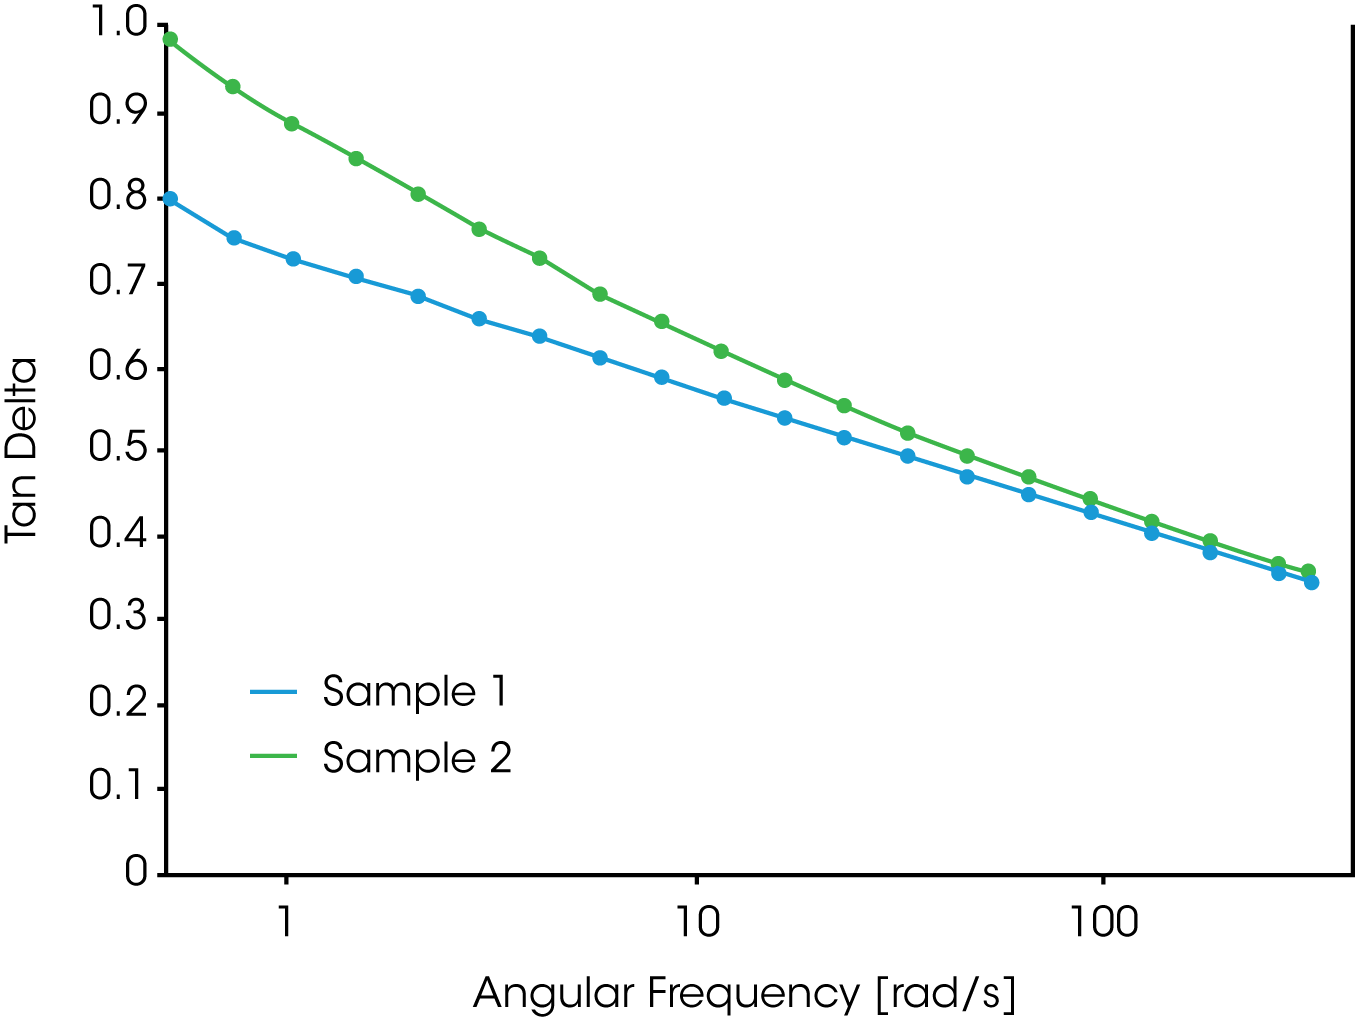 Figure 3. Data from a frequency sweep shows the tangent delta as a function of angular frequency for sample 1 and 2. Significant differences in the viscoelastic response between the samples is observed at low angular frequency which correlates with polymer architecture. Sample 1 shows a lower tangent delta value, indicating a higher degree of elasticity.